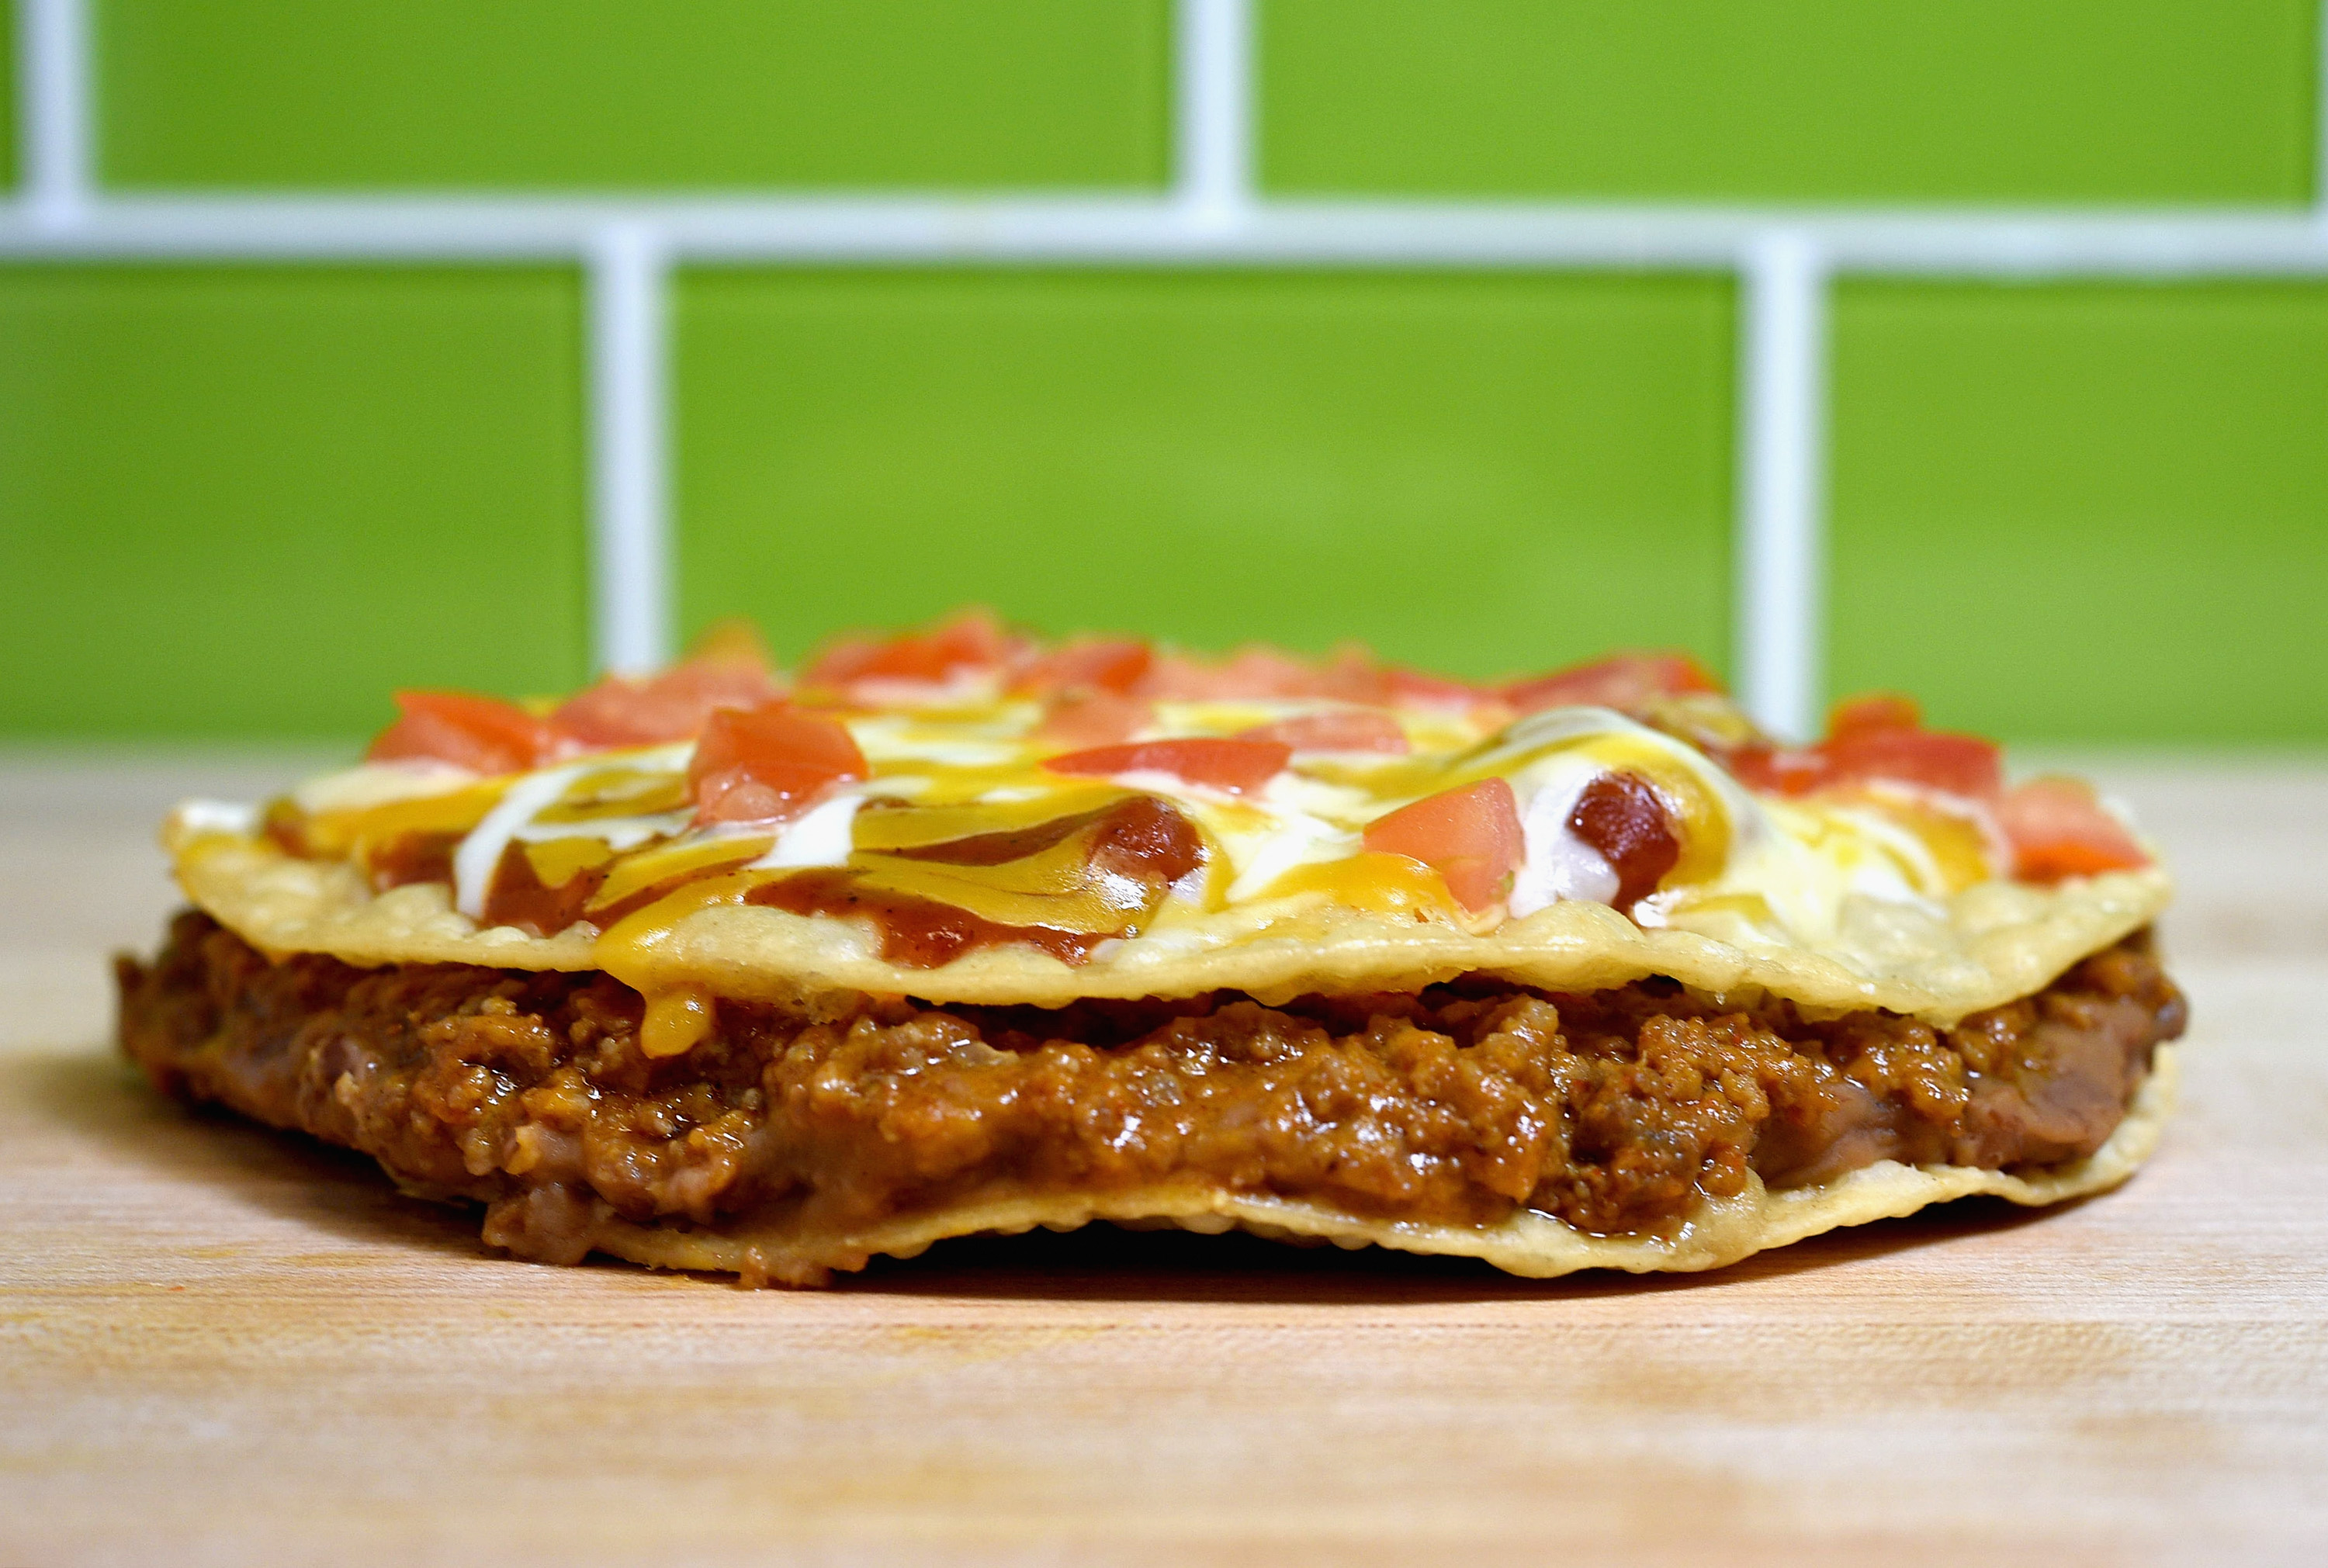 Discontinued Fast Food to Revive After Taco Bell&039s Mexican Pizza | The Manual